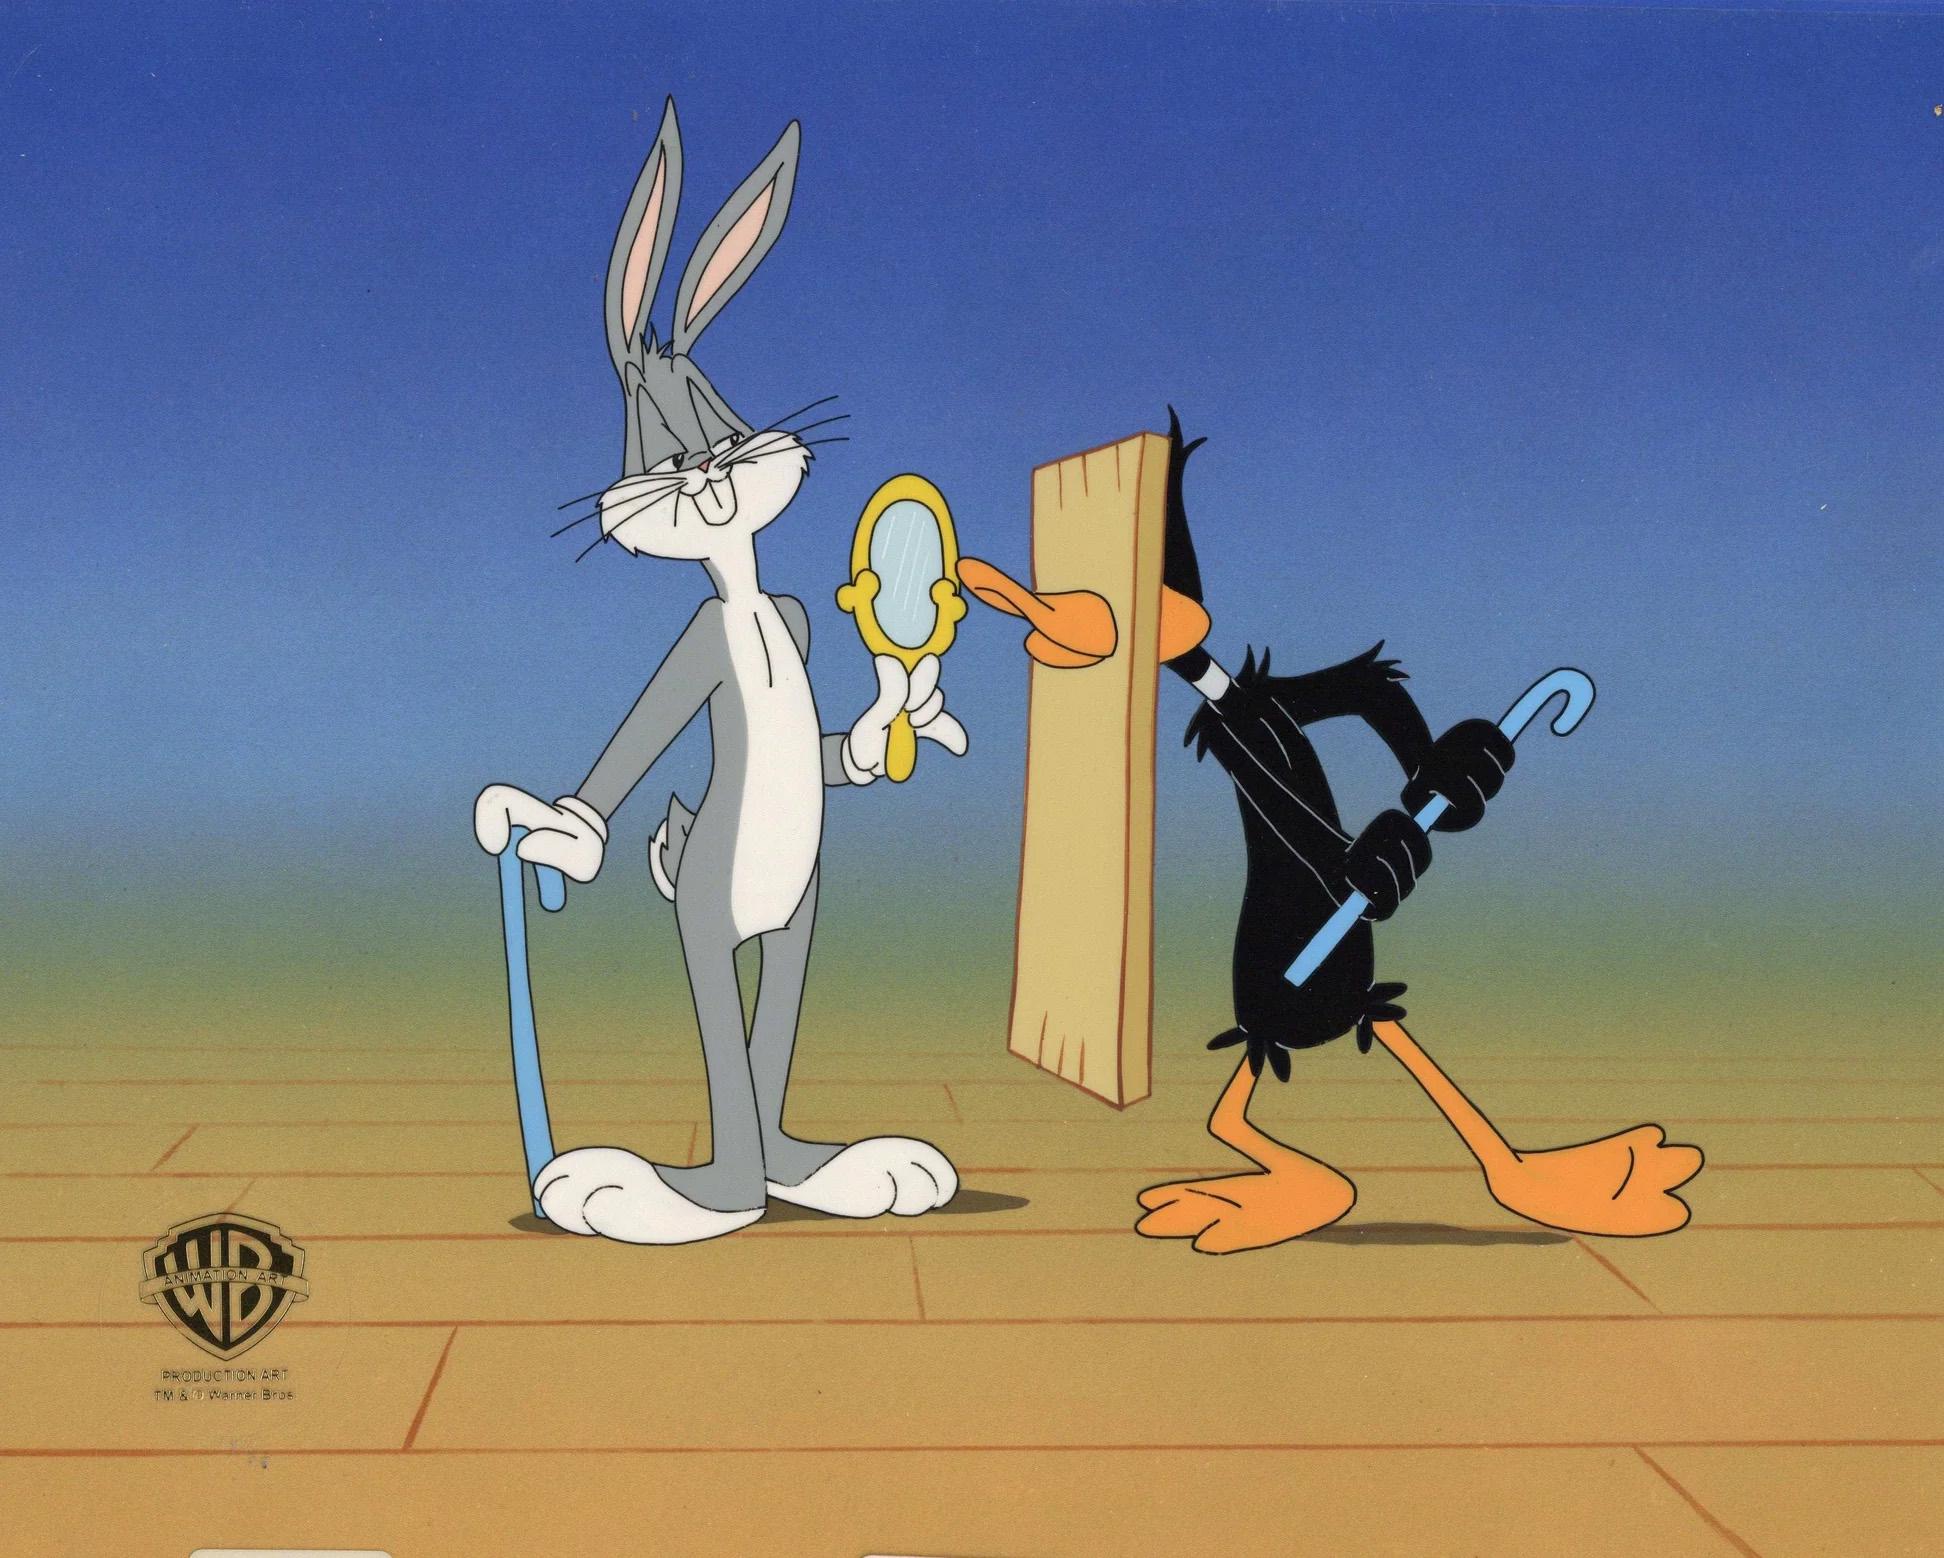 Looney Tunes Original Production Cel: Bugs Bunny and Daffy Duck - Art by Friz Freleng